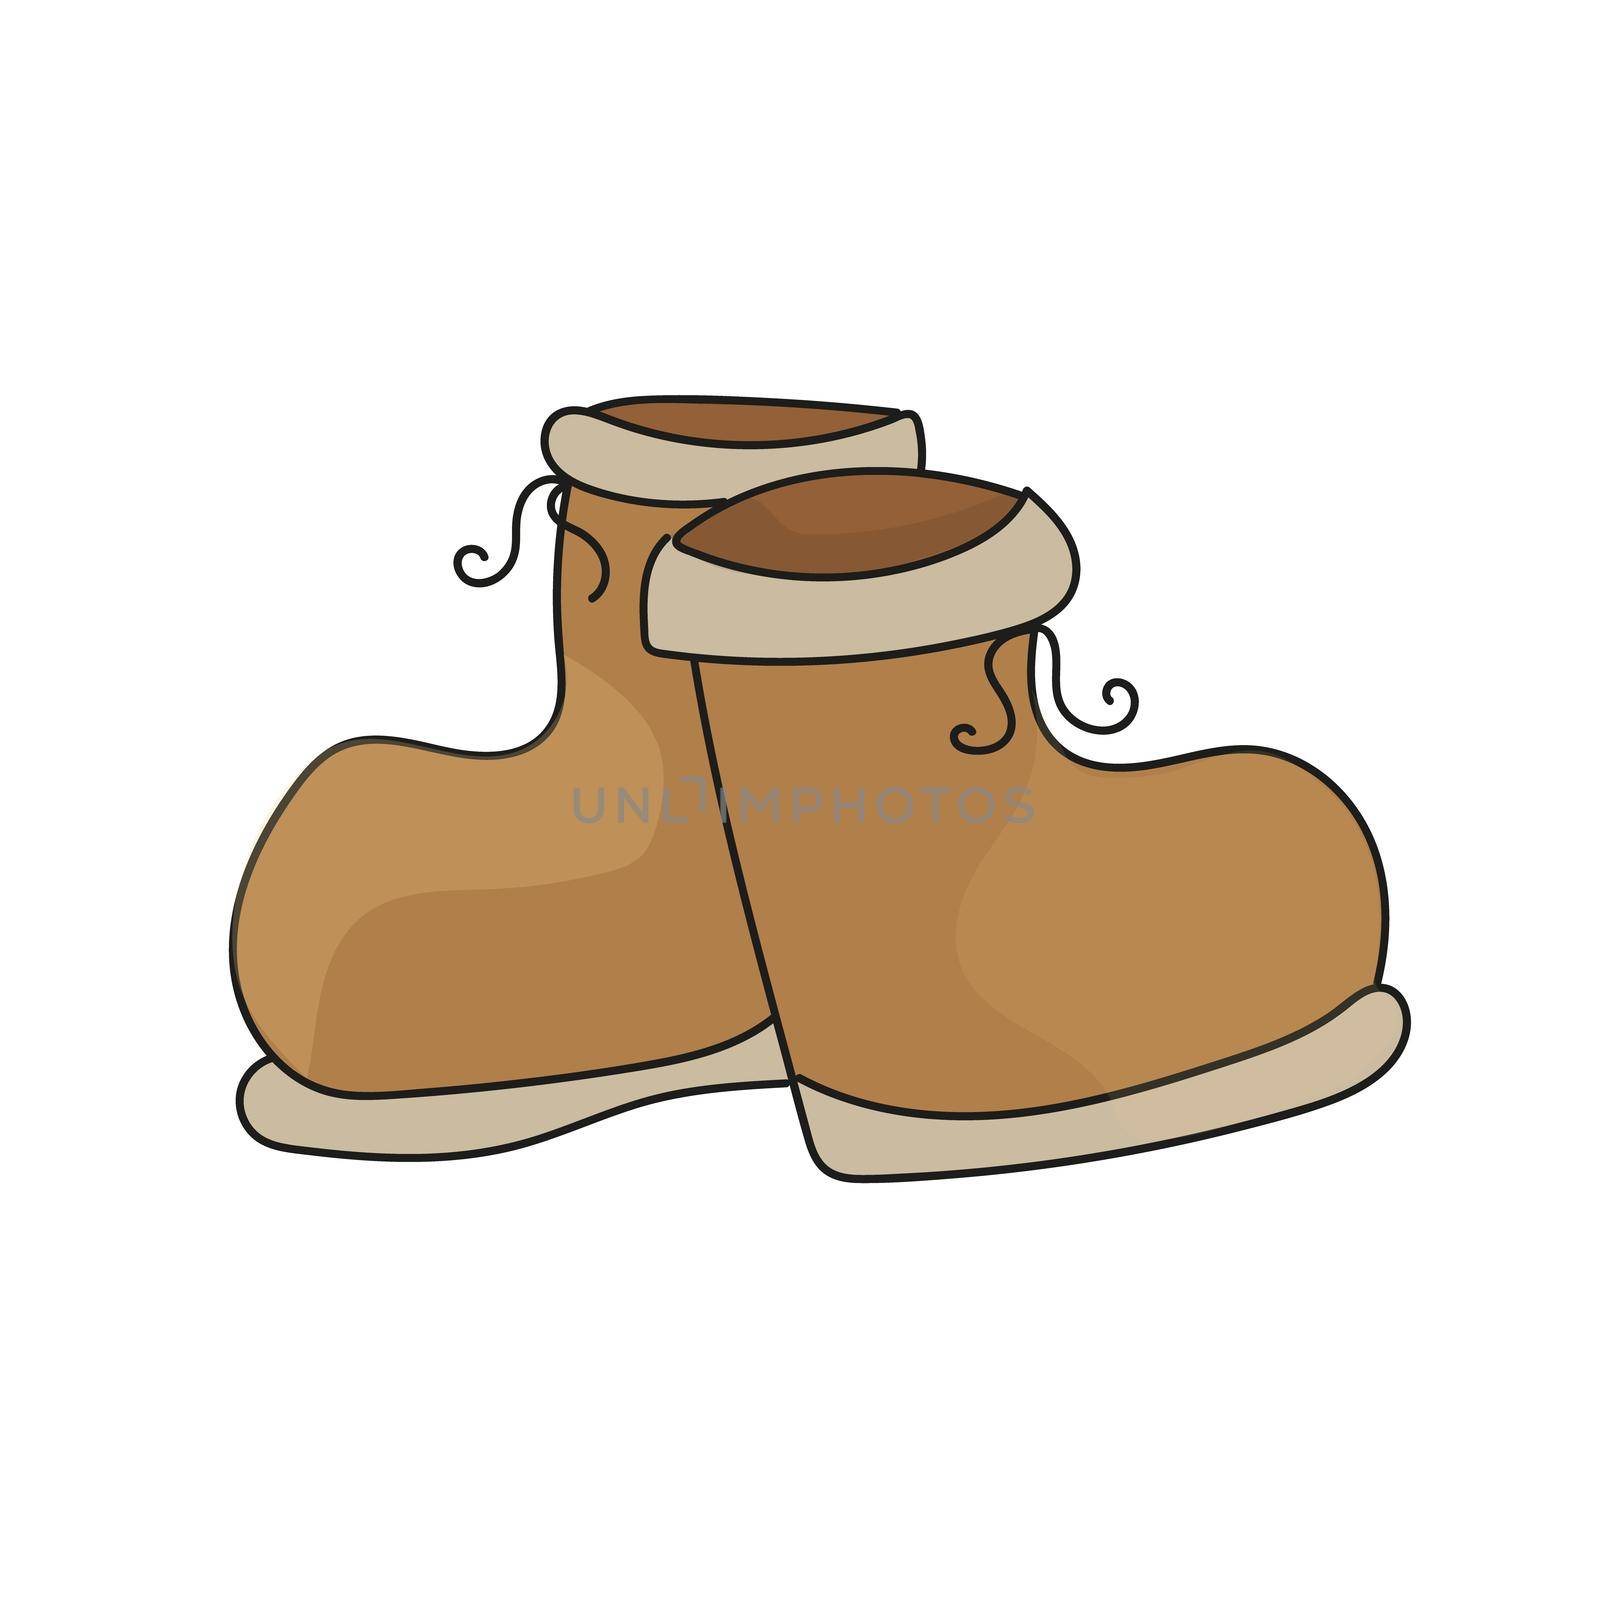 Pair of brown boots - cartoon illustration isolated on white by natali_brill